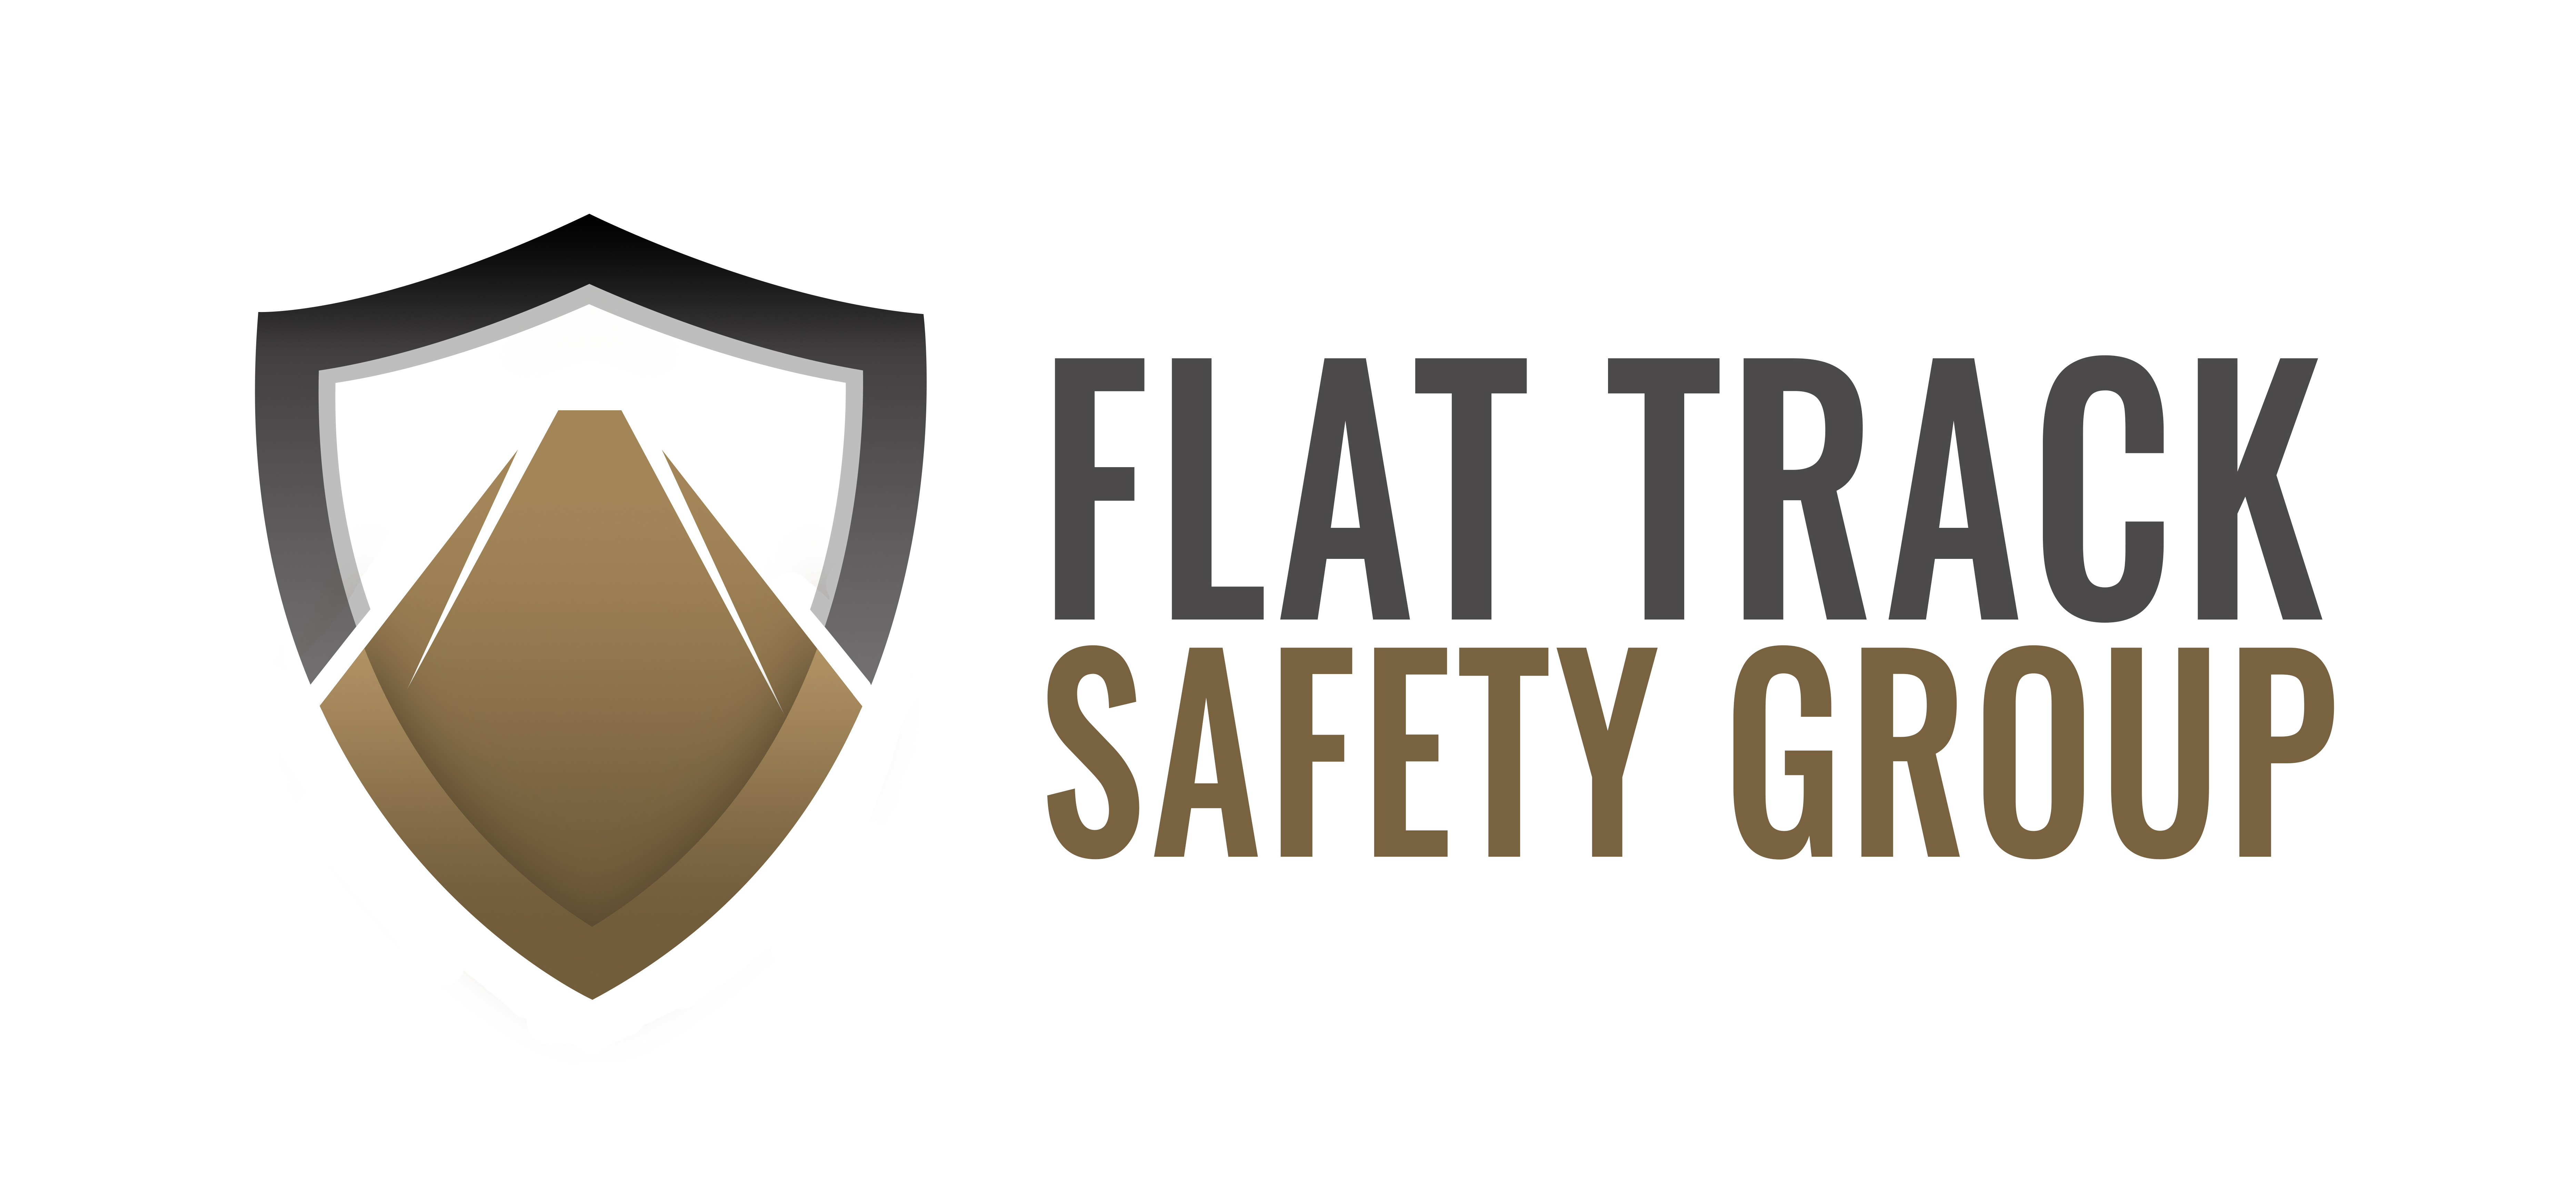 Company Logo For Flat Track Safety Group'